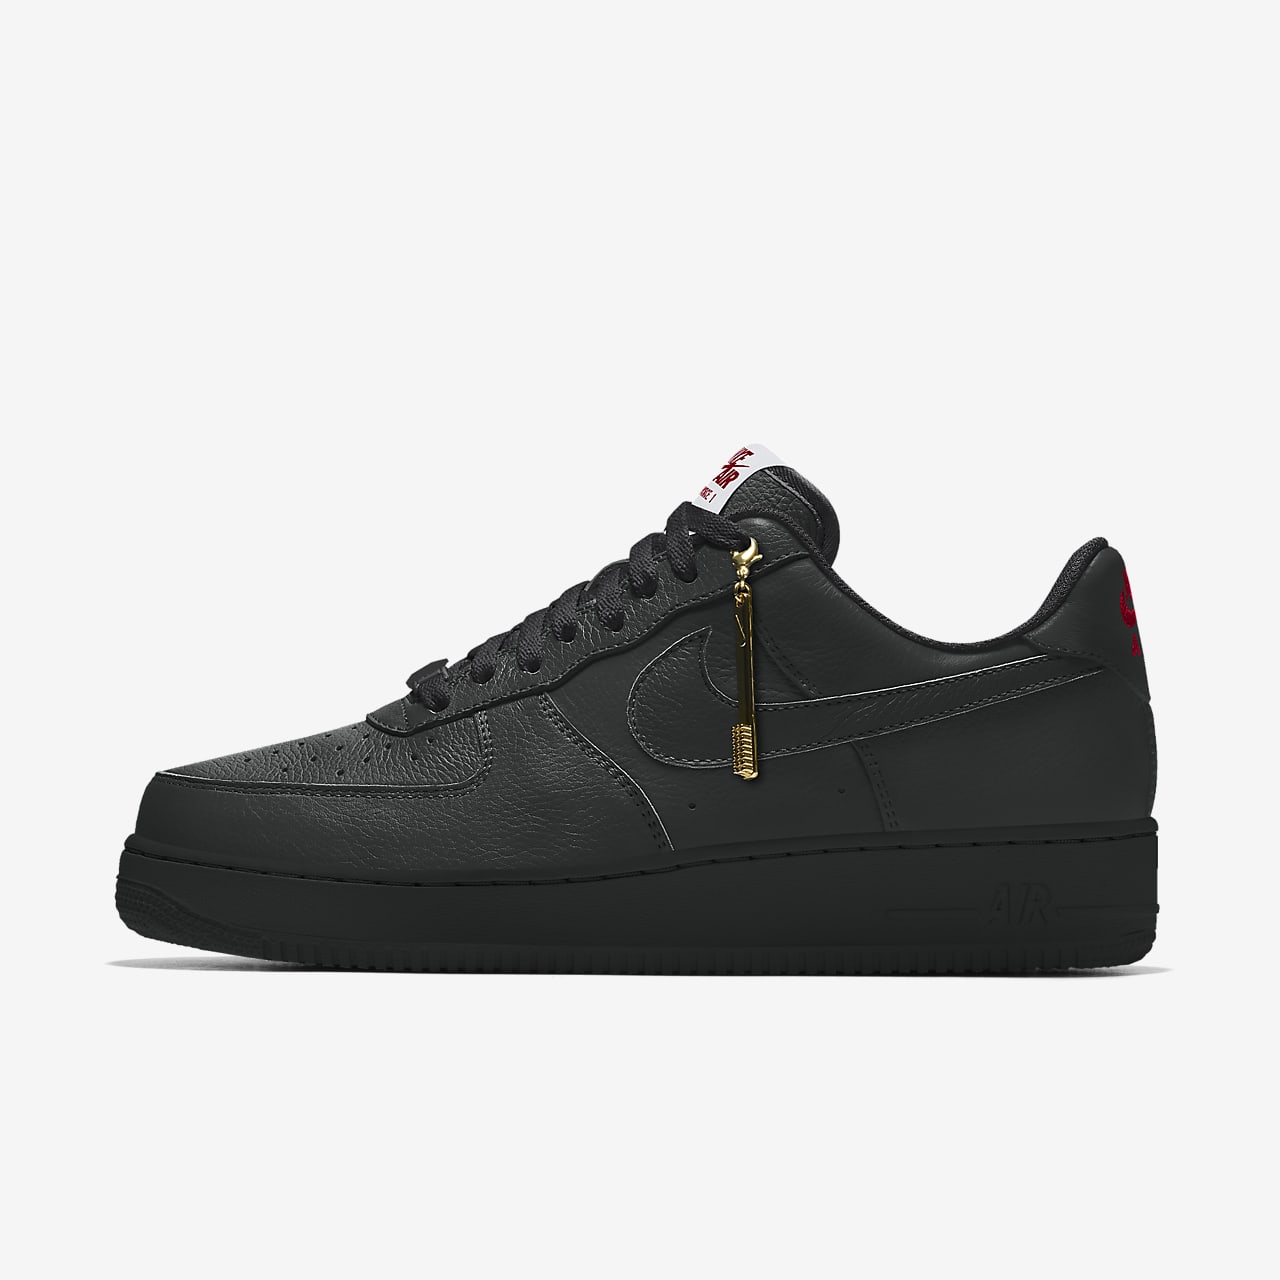 Nike Air Force 1 Low Unlocked By You Custom Women's Shoes